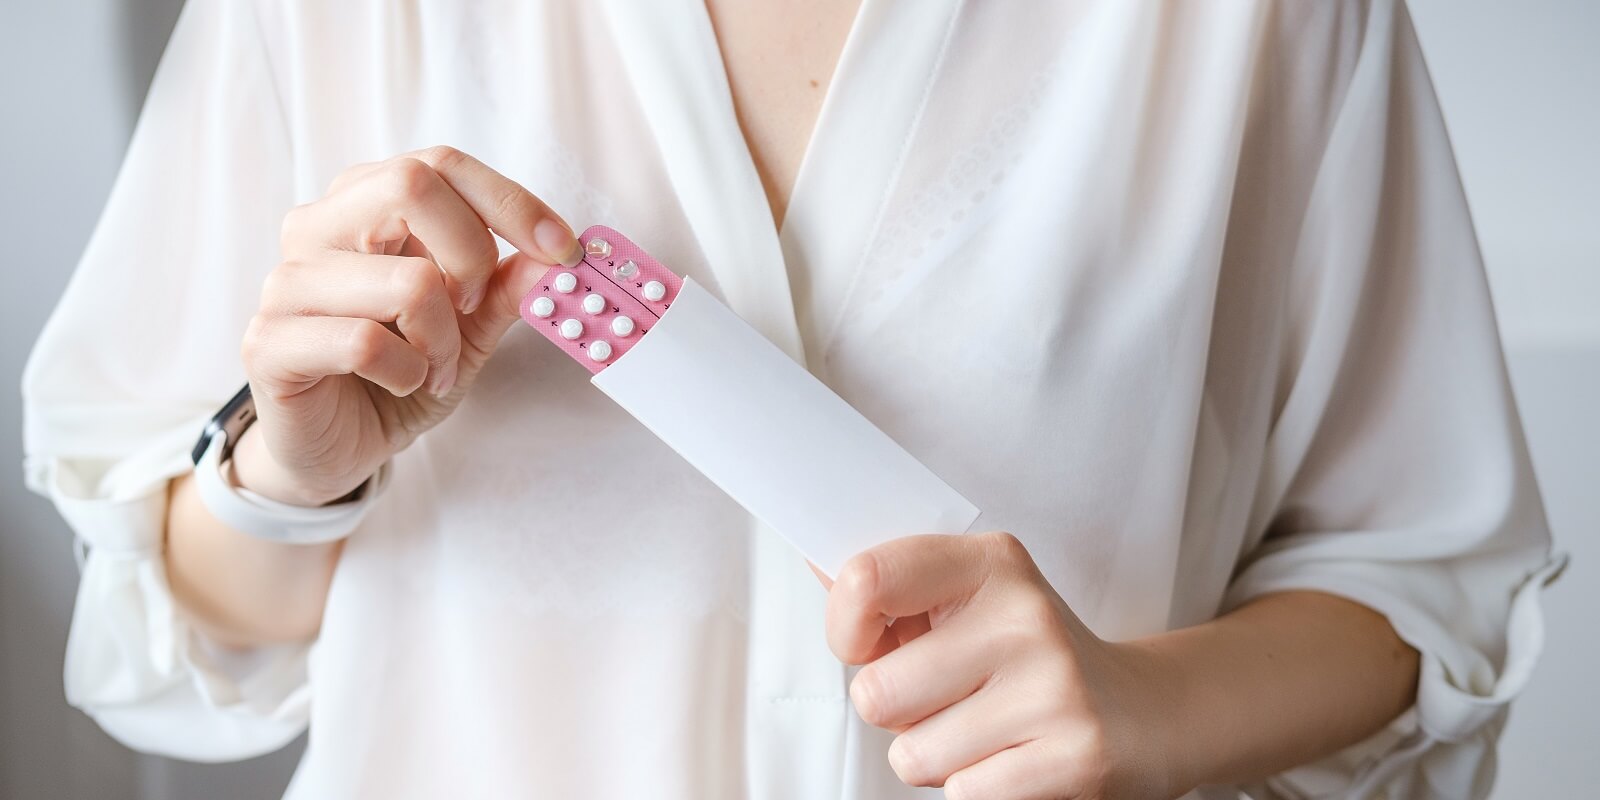 woman in white blouse holding hormonal oral contraceptives in a pink blister